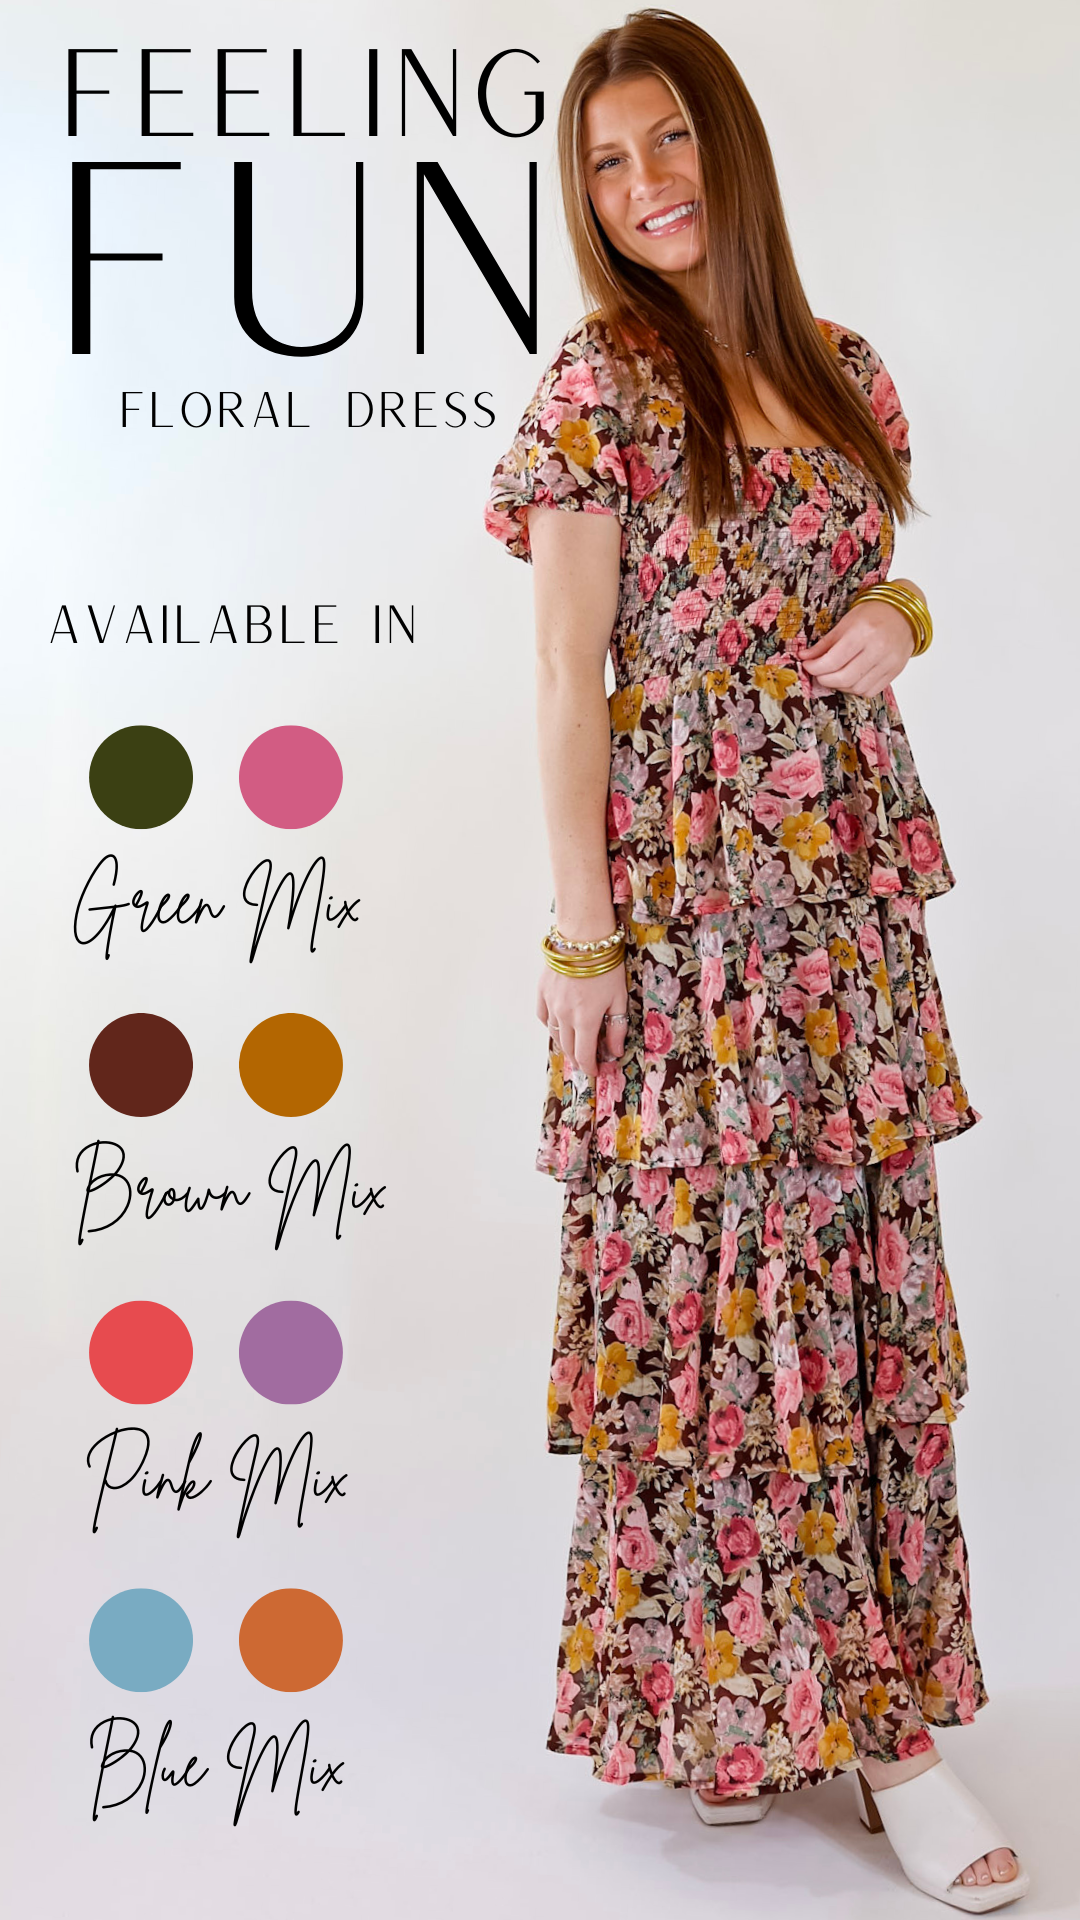 Fun Feeling Floral Tiered Maxi Dress with Smocked Balloon Sleeves in Brown Mix